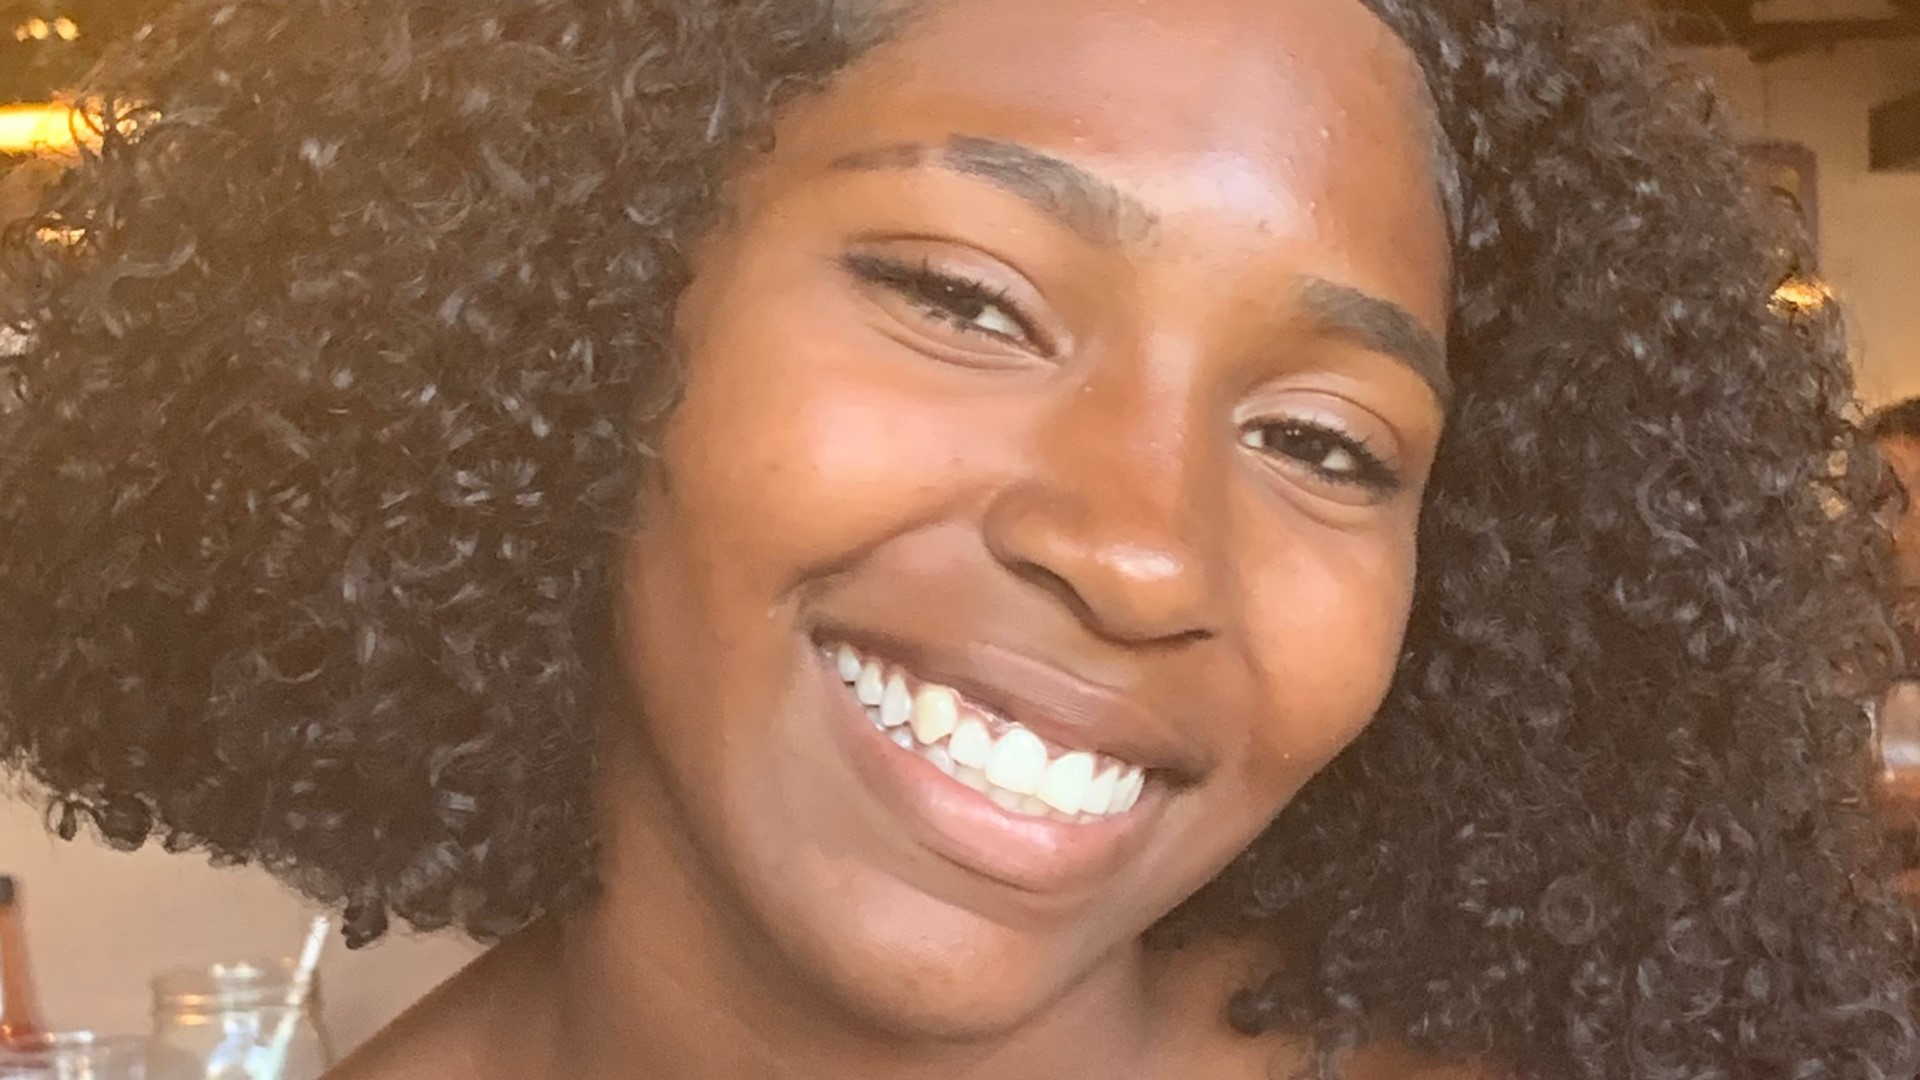 Alynia Lawrence was shot in a parked car at a liquor store on Stockton Blvd in South Sacramento. Her family is seeking help finding the shooter.